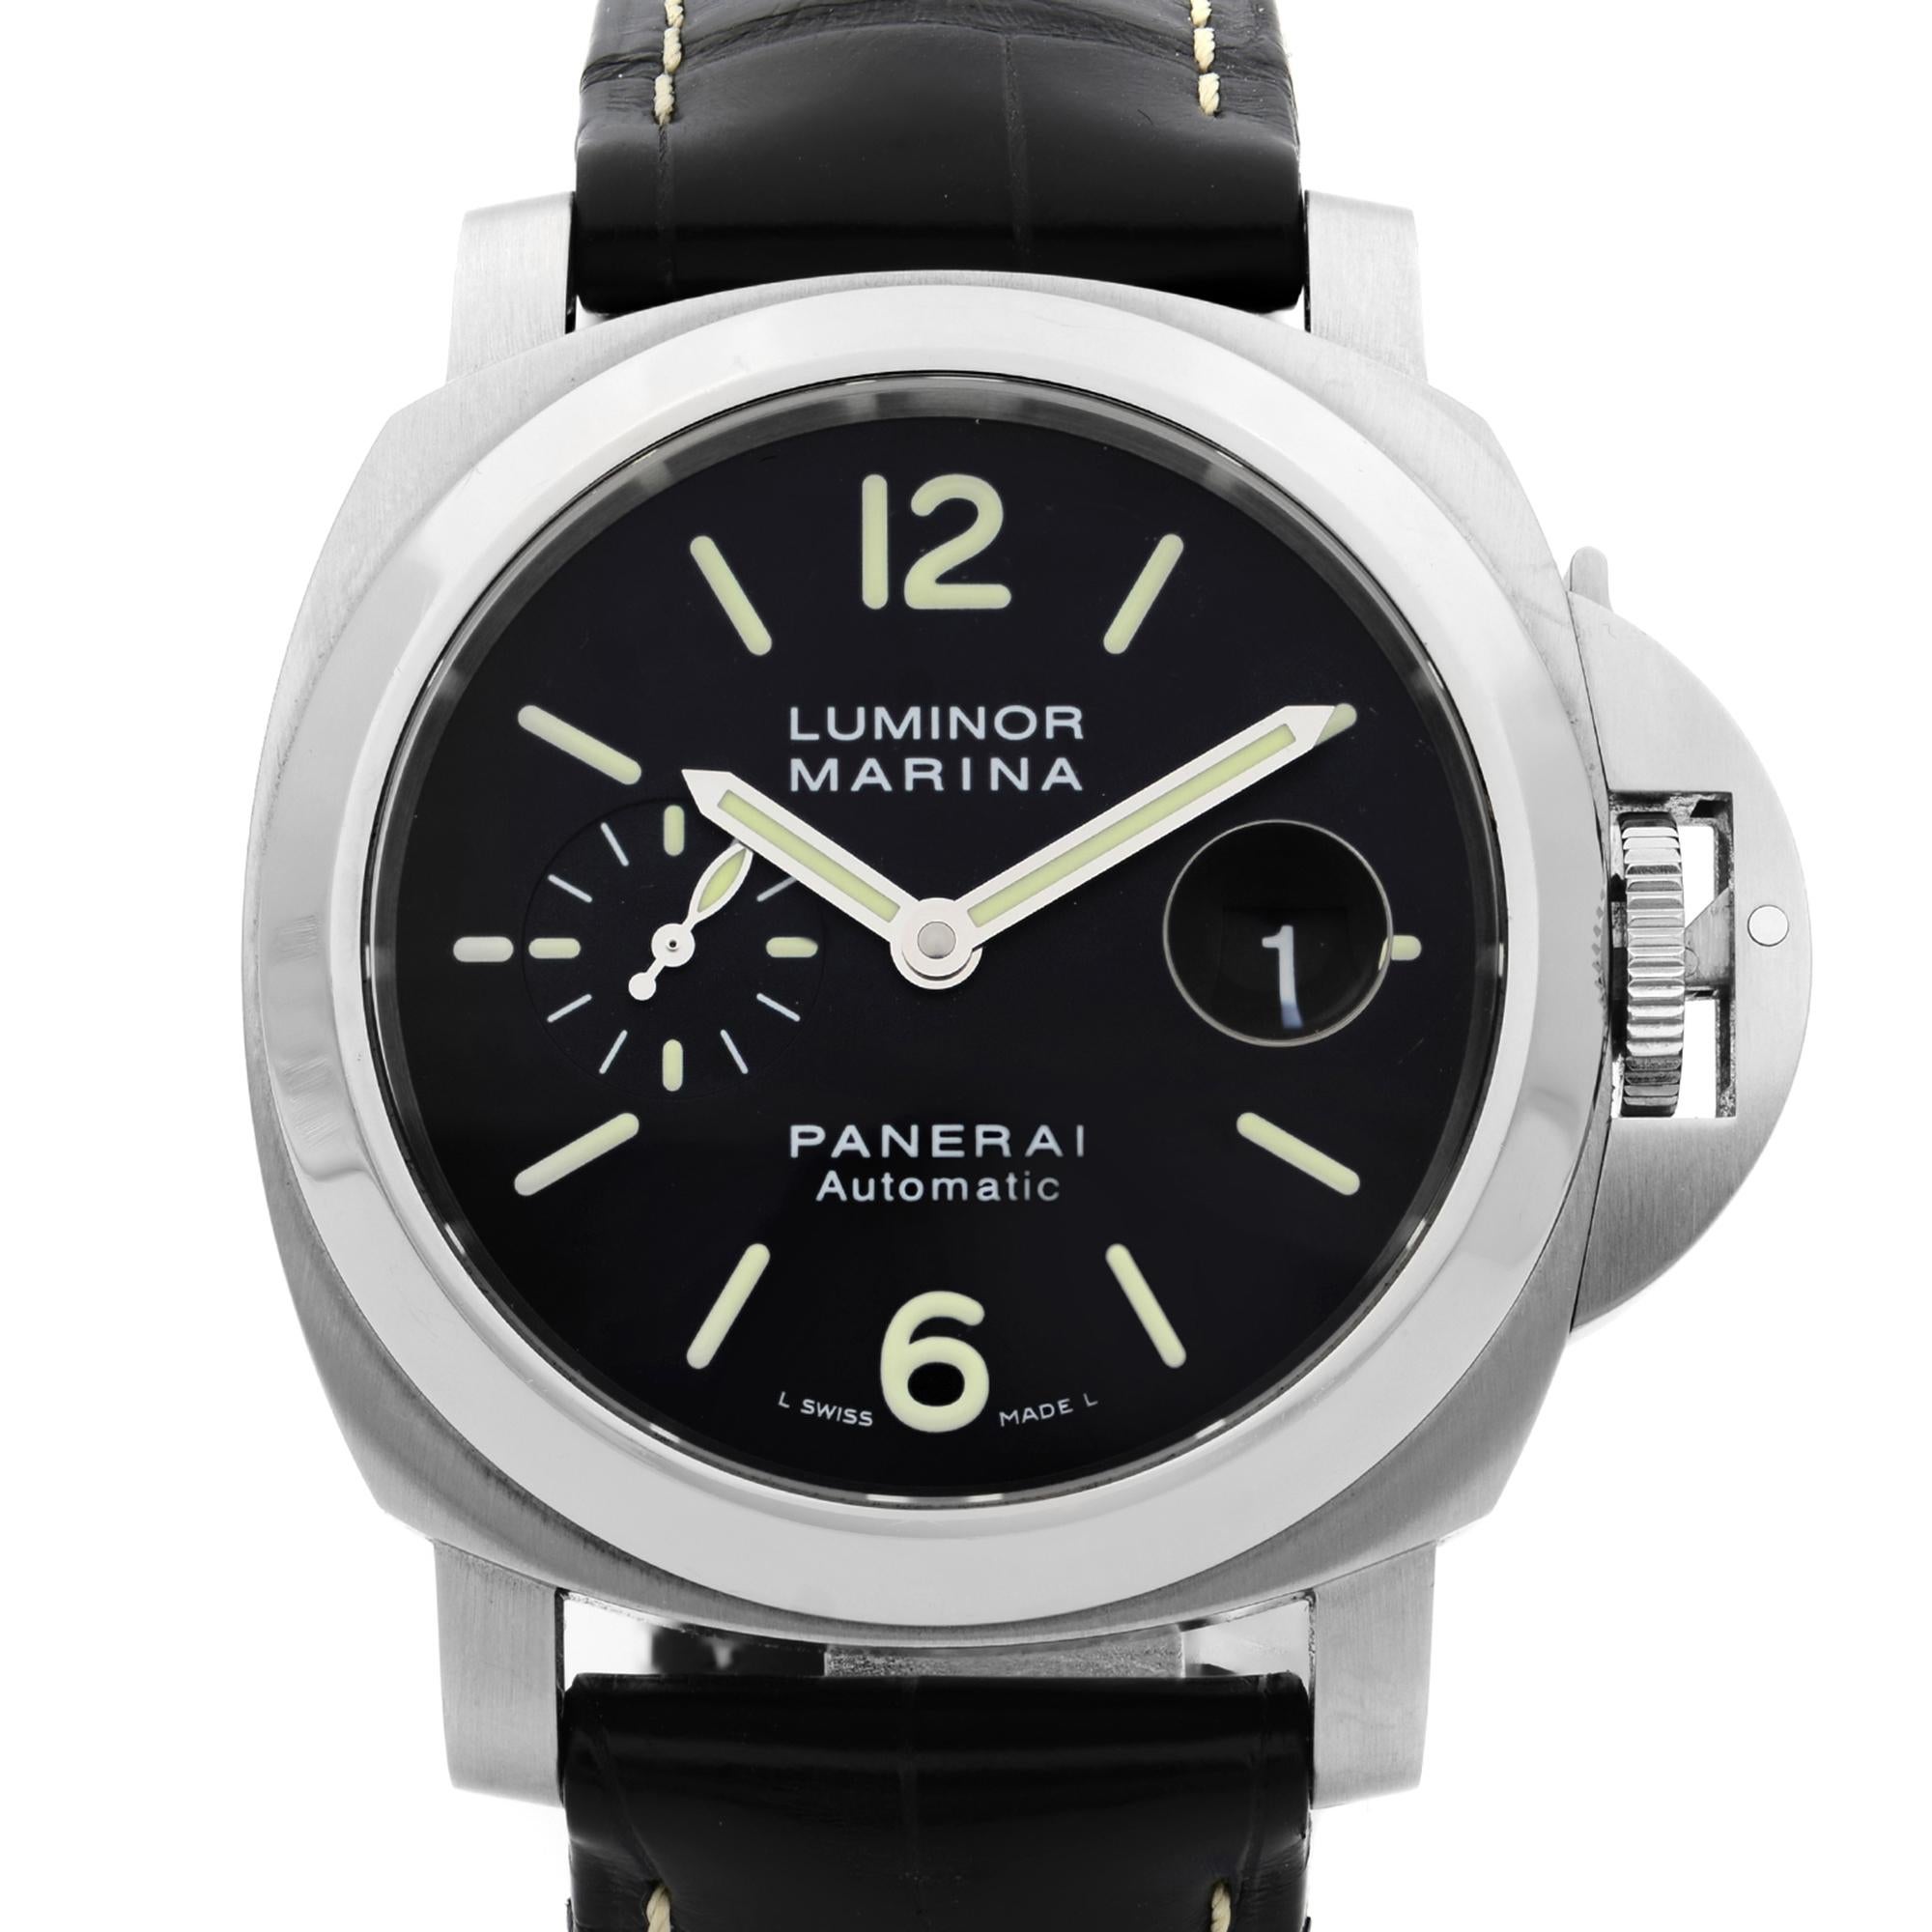 This pre-owned Panerai Luminor  PAM00048  is a beautiful men's timepiece that is powered by mechanical (automatic) movement which is cased in a stainless steel case. It has a round shape face, date indicator, small seconds subdial dial and has hand